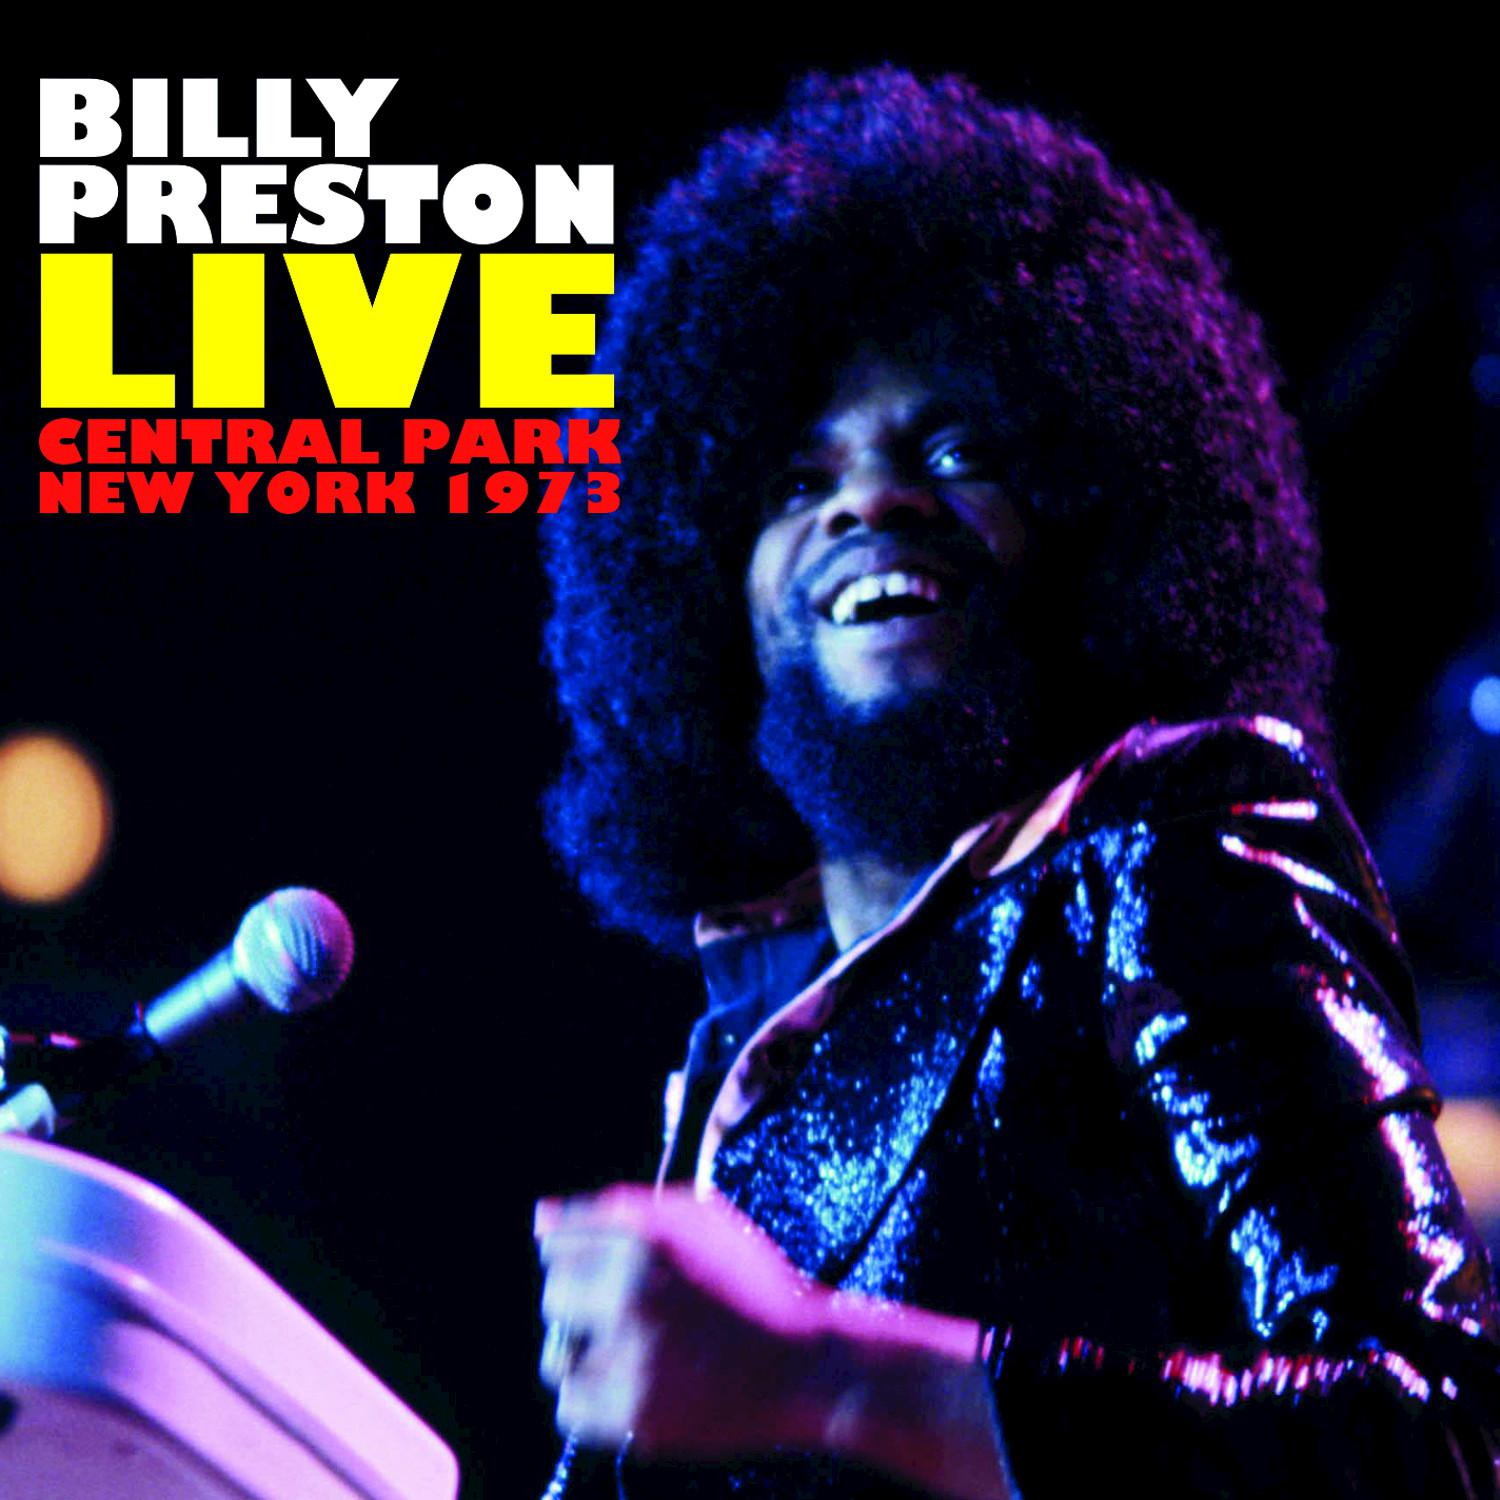 Live in New York (Live)